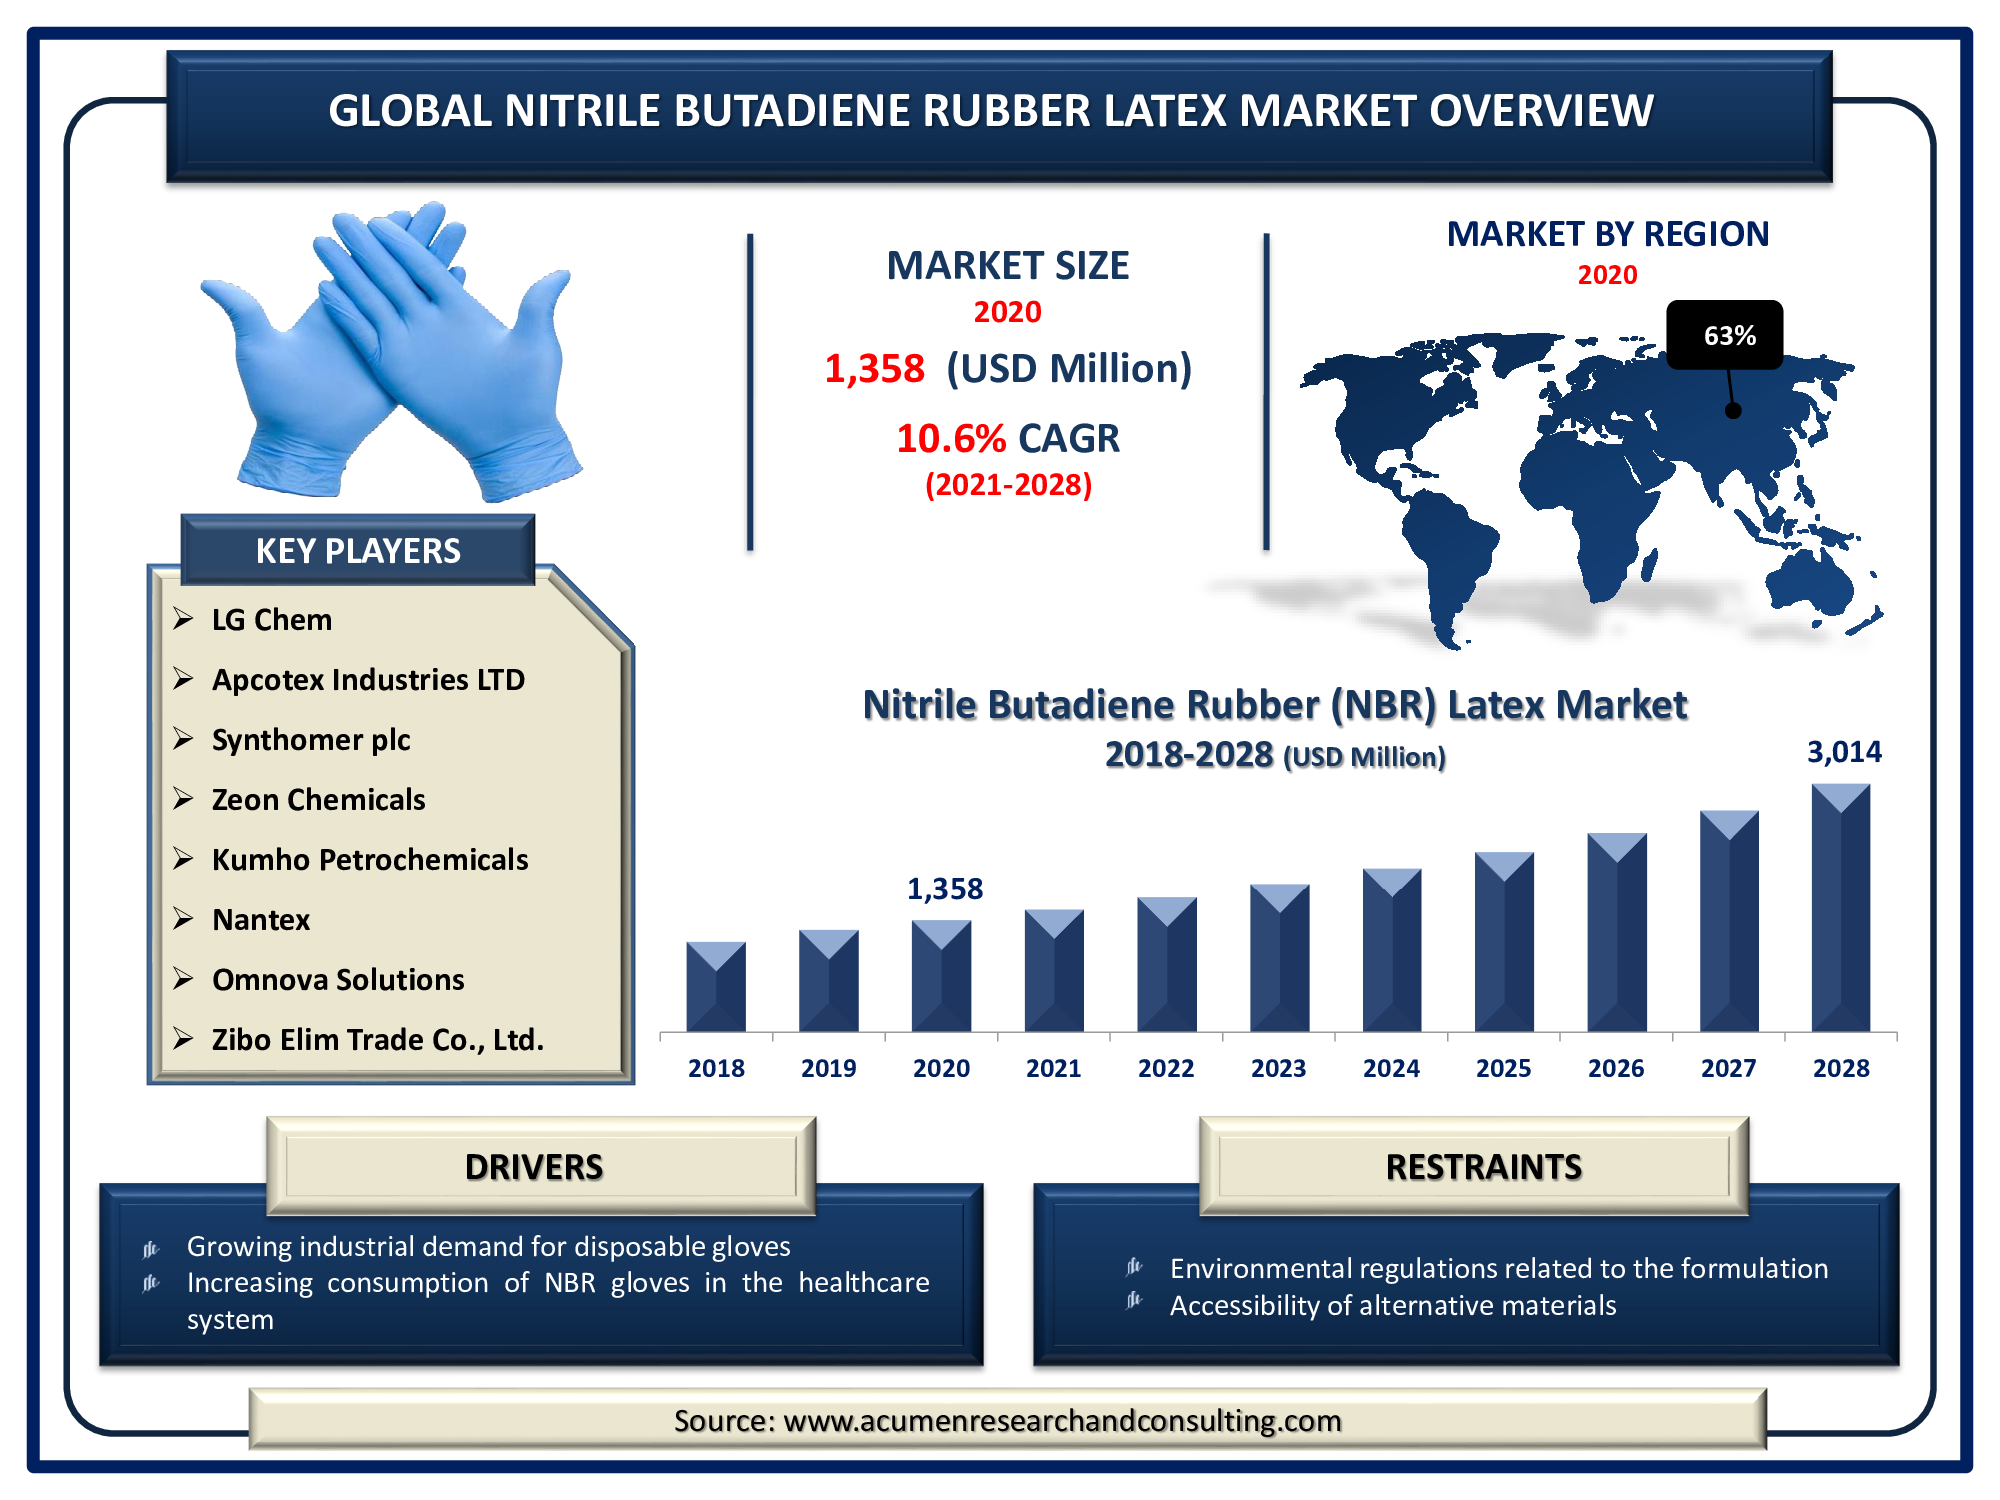 Nitrile Butadiene Rubber Latex Market is predicted to be worth USD 3,014 Million by 2028, with a CAGR of 10.6%